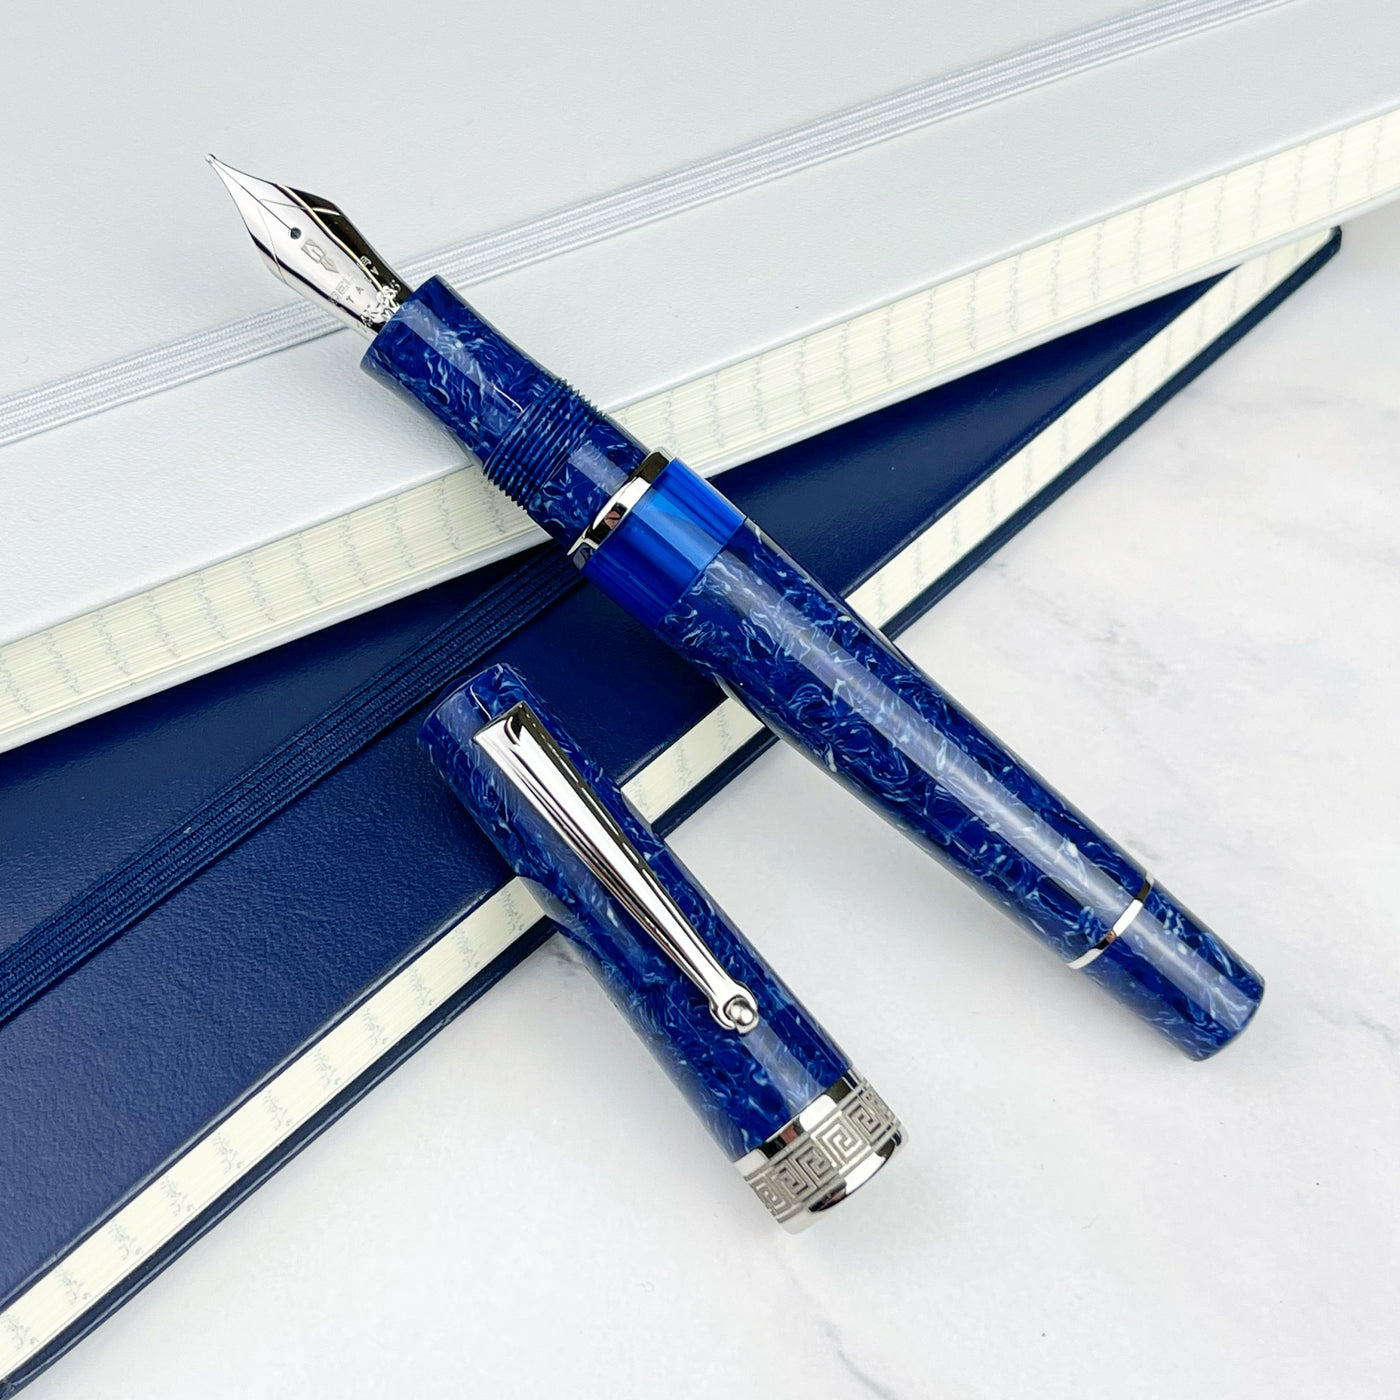 Delta Lapis Blue Celluloid Fountain Pen with Silver Trim (Limited Edition)